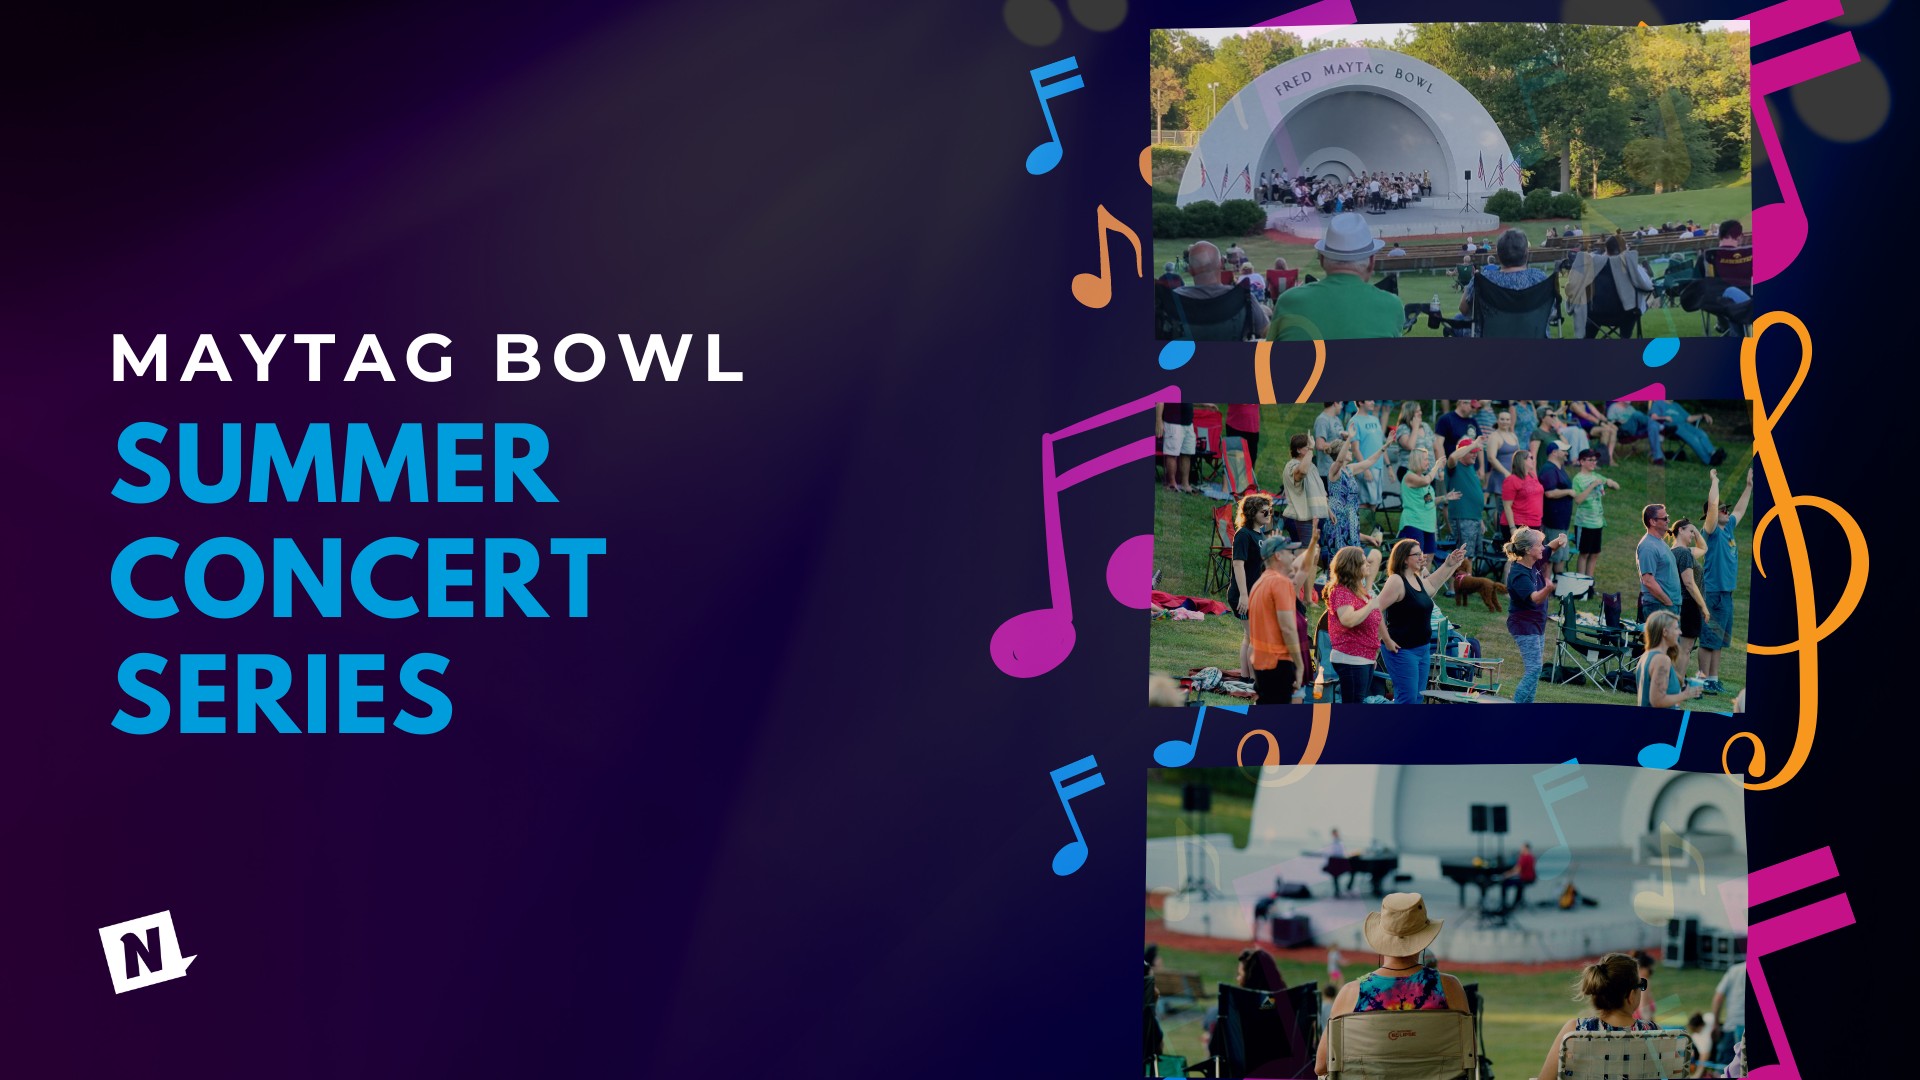 Event Promo Photo For Maytag Bowl Summer Concert Series